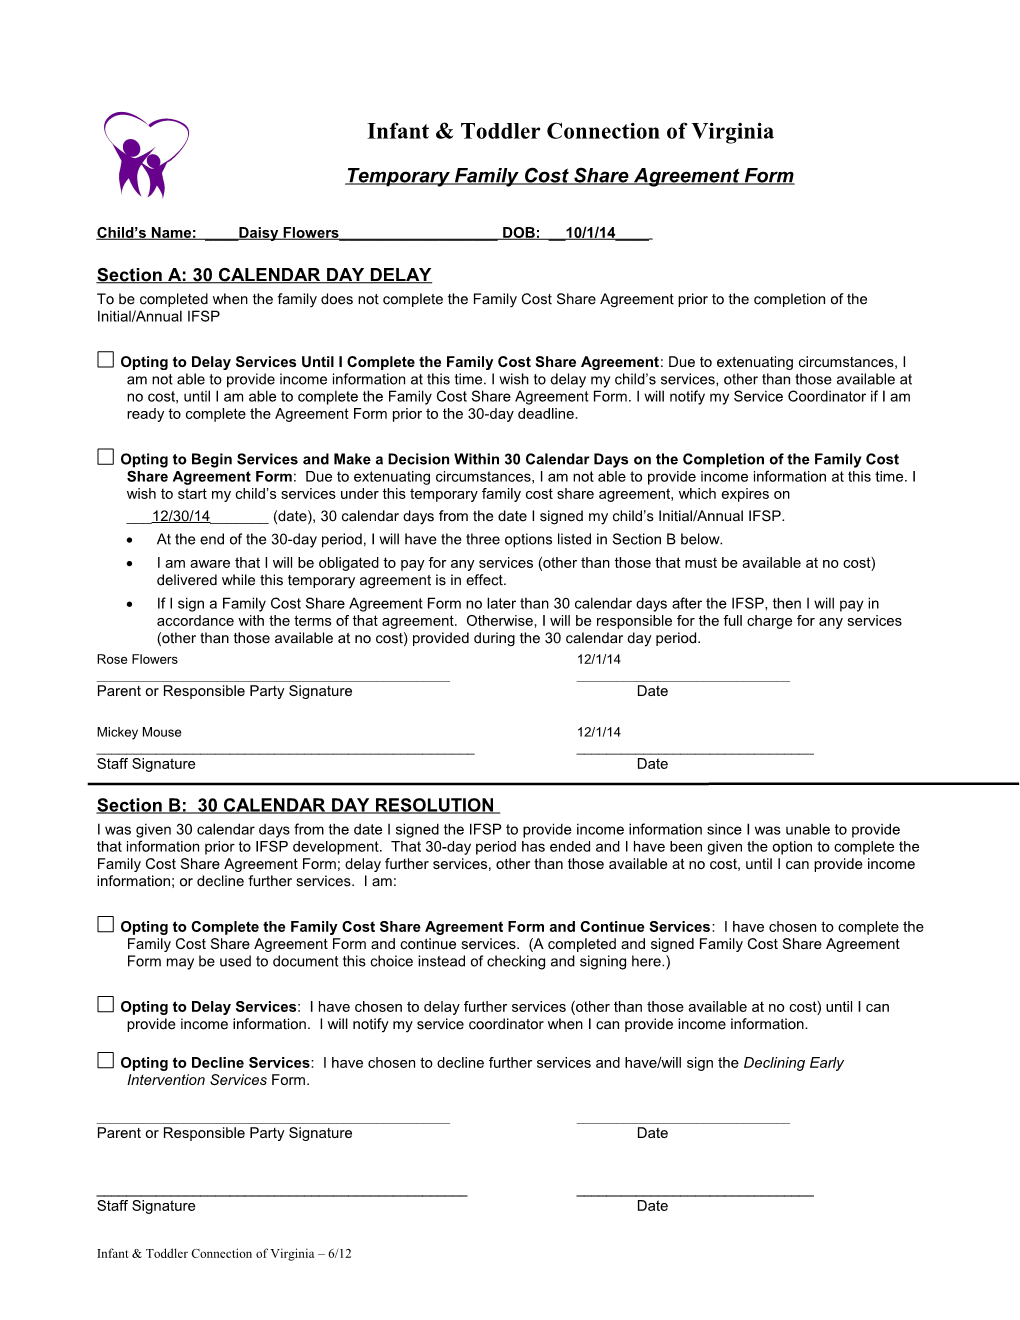 Temporary Family Cost Share Agreement